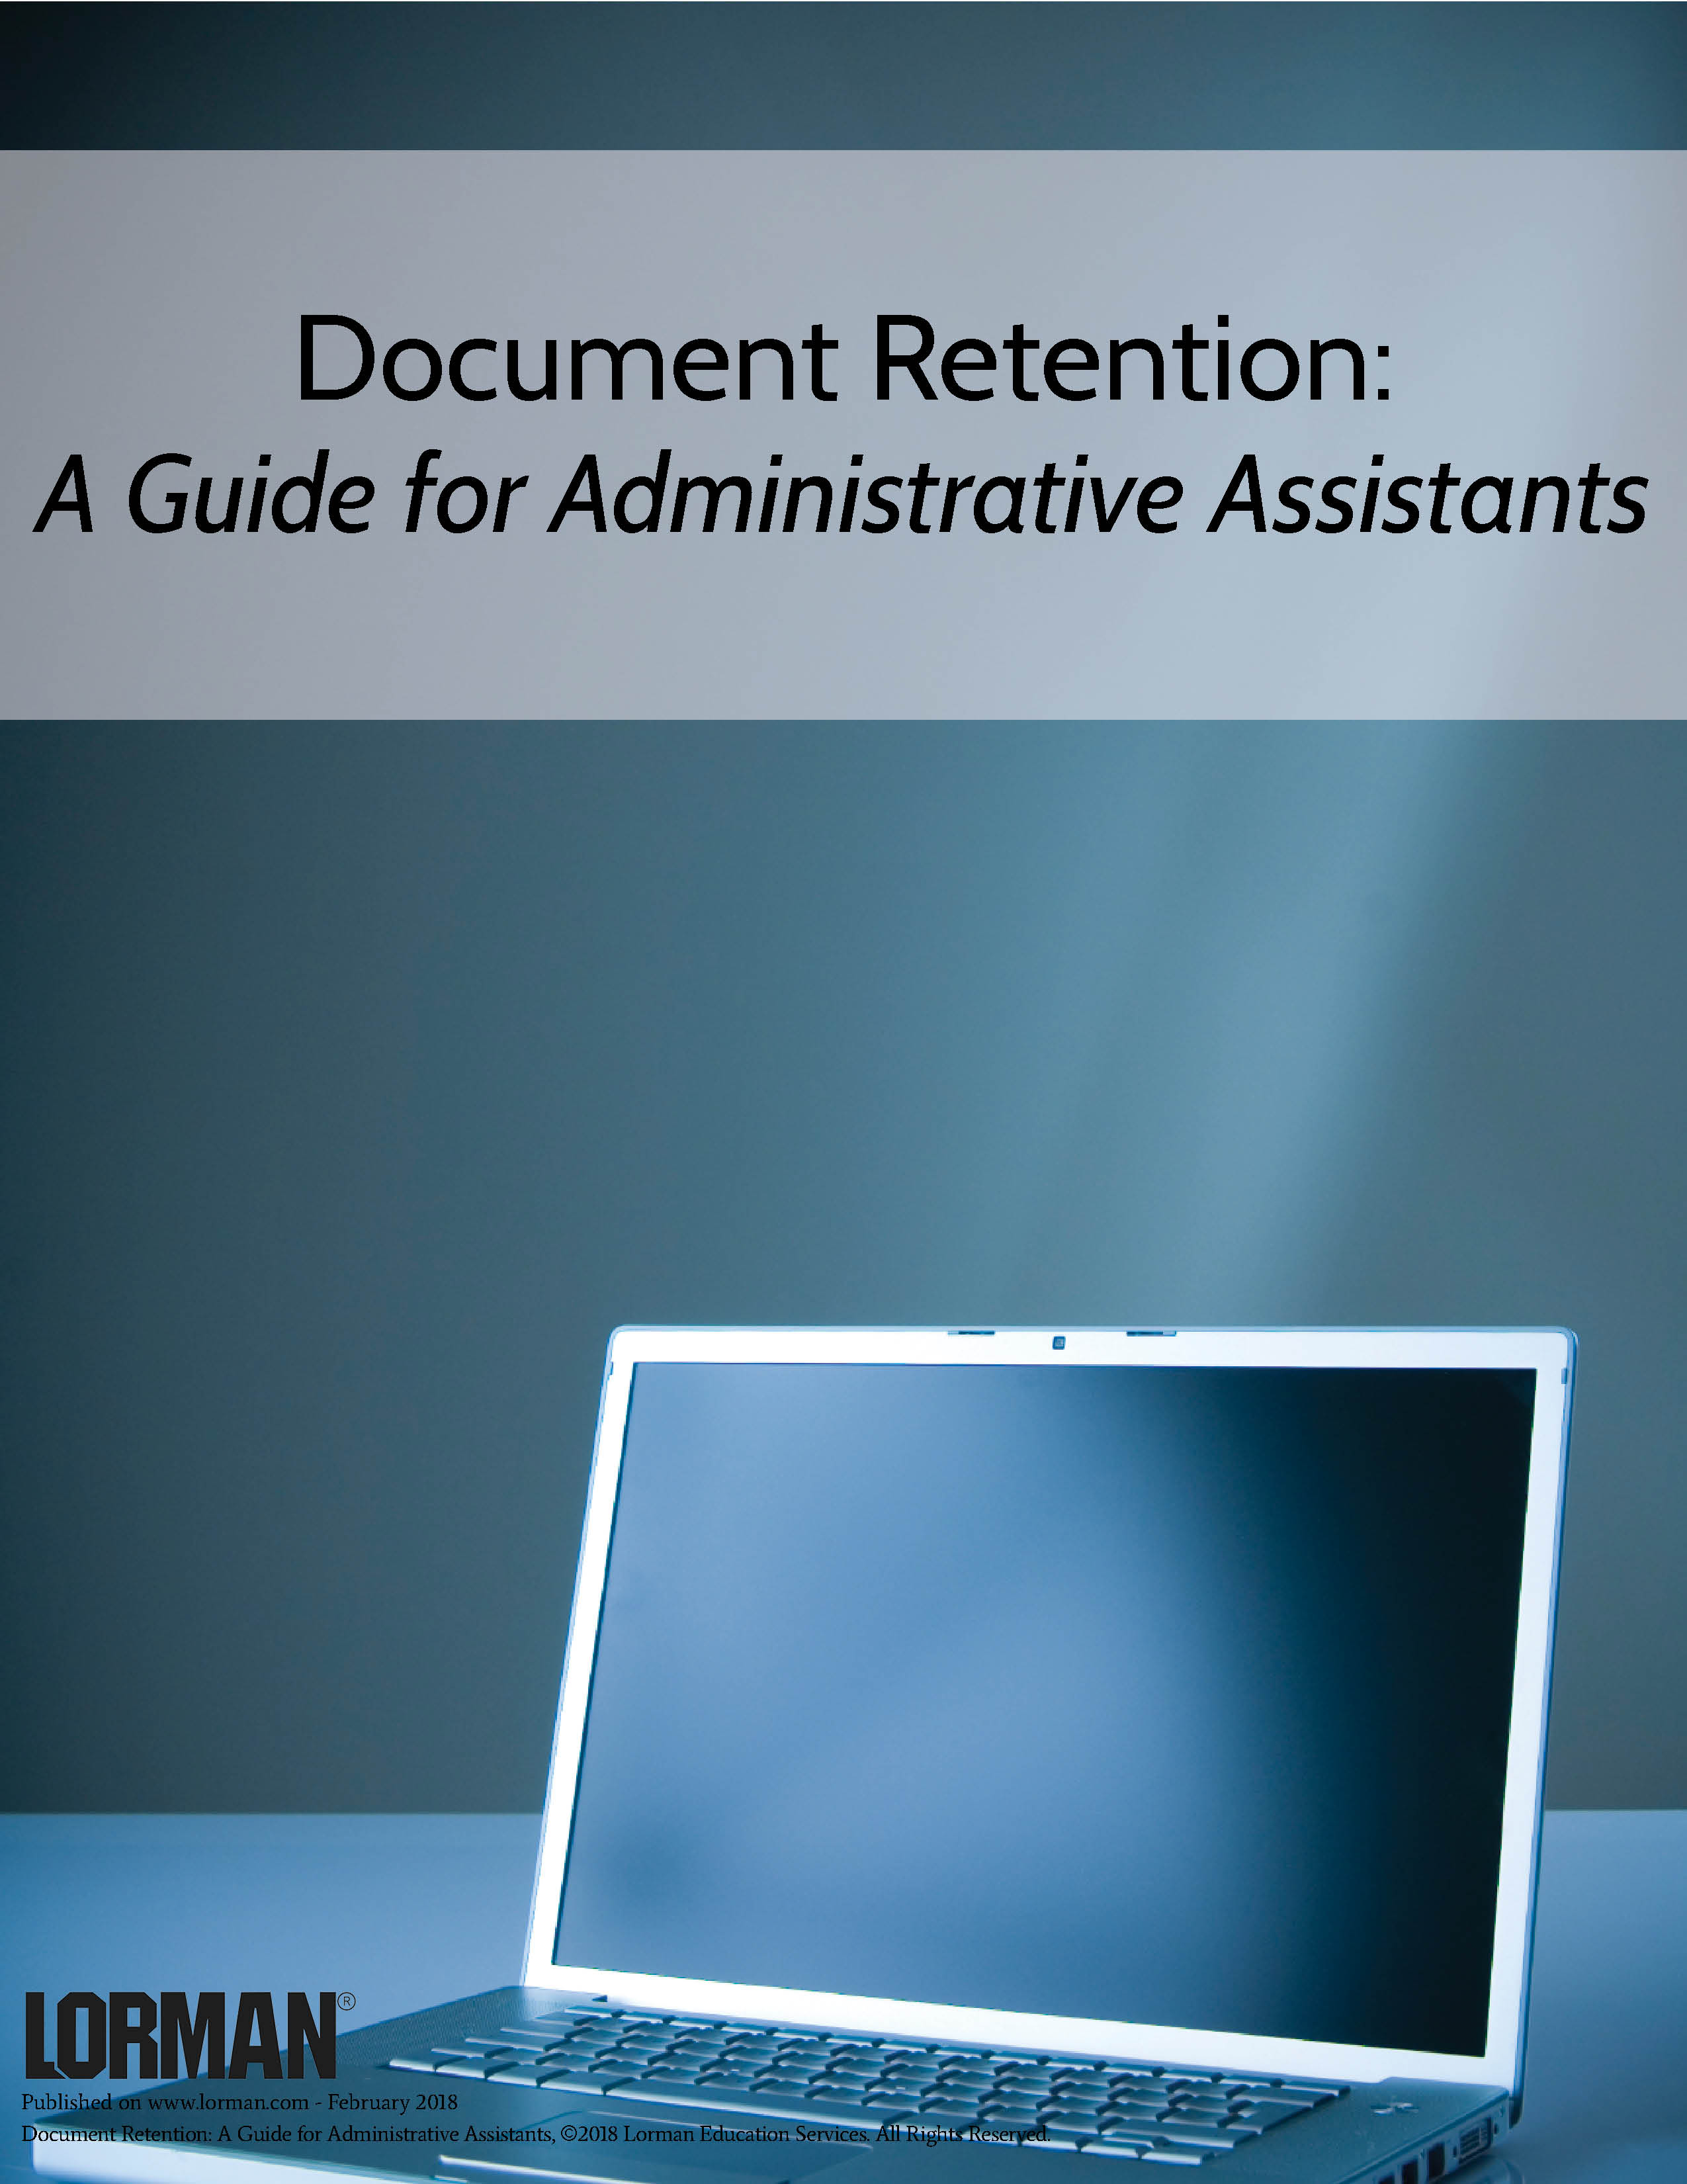 Document Retention: A Guide for Administrative Assistants